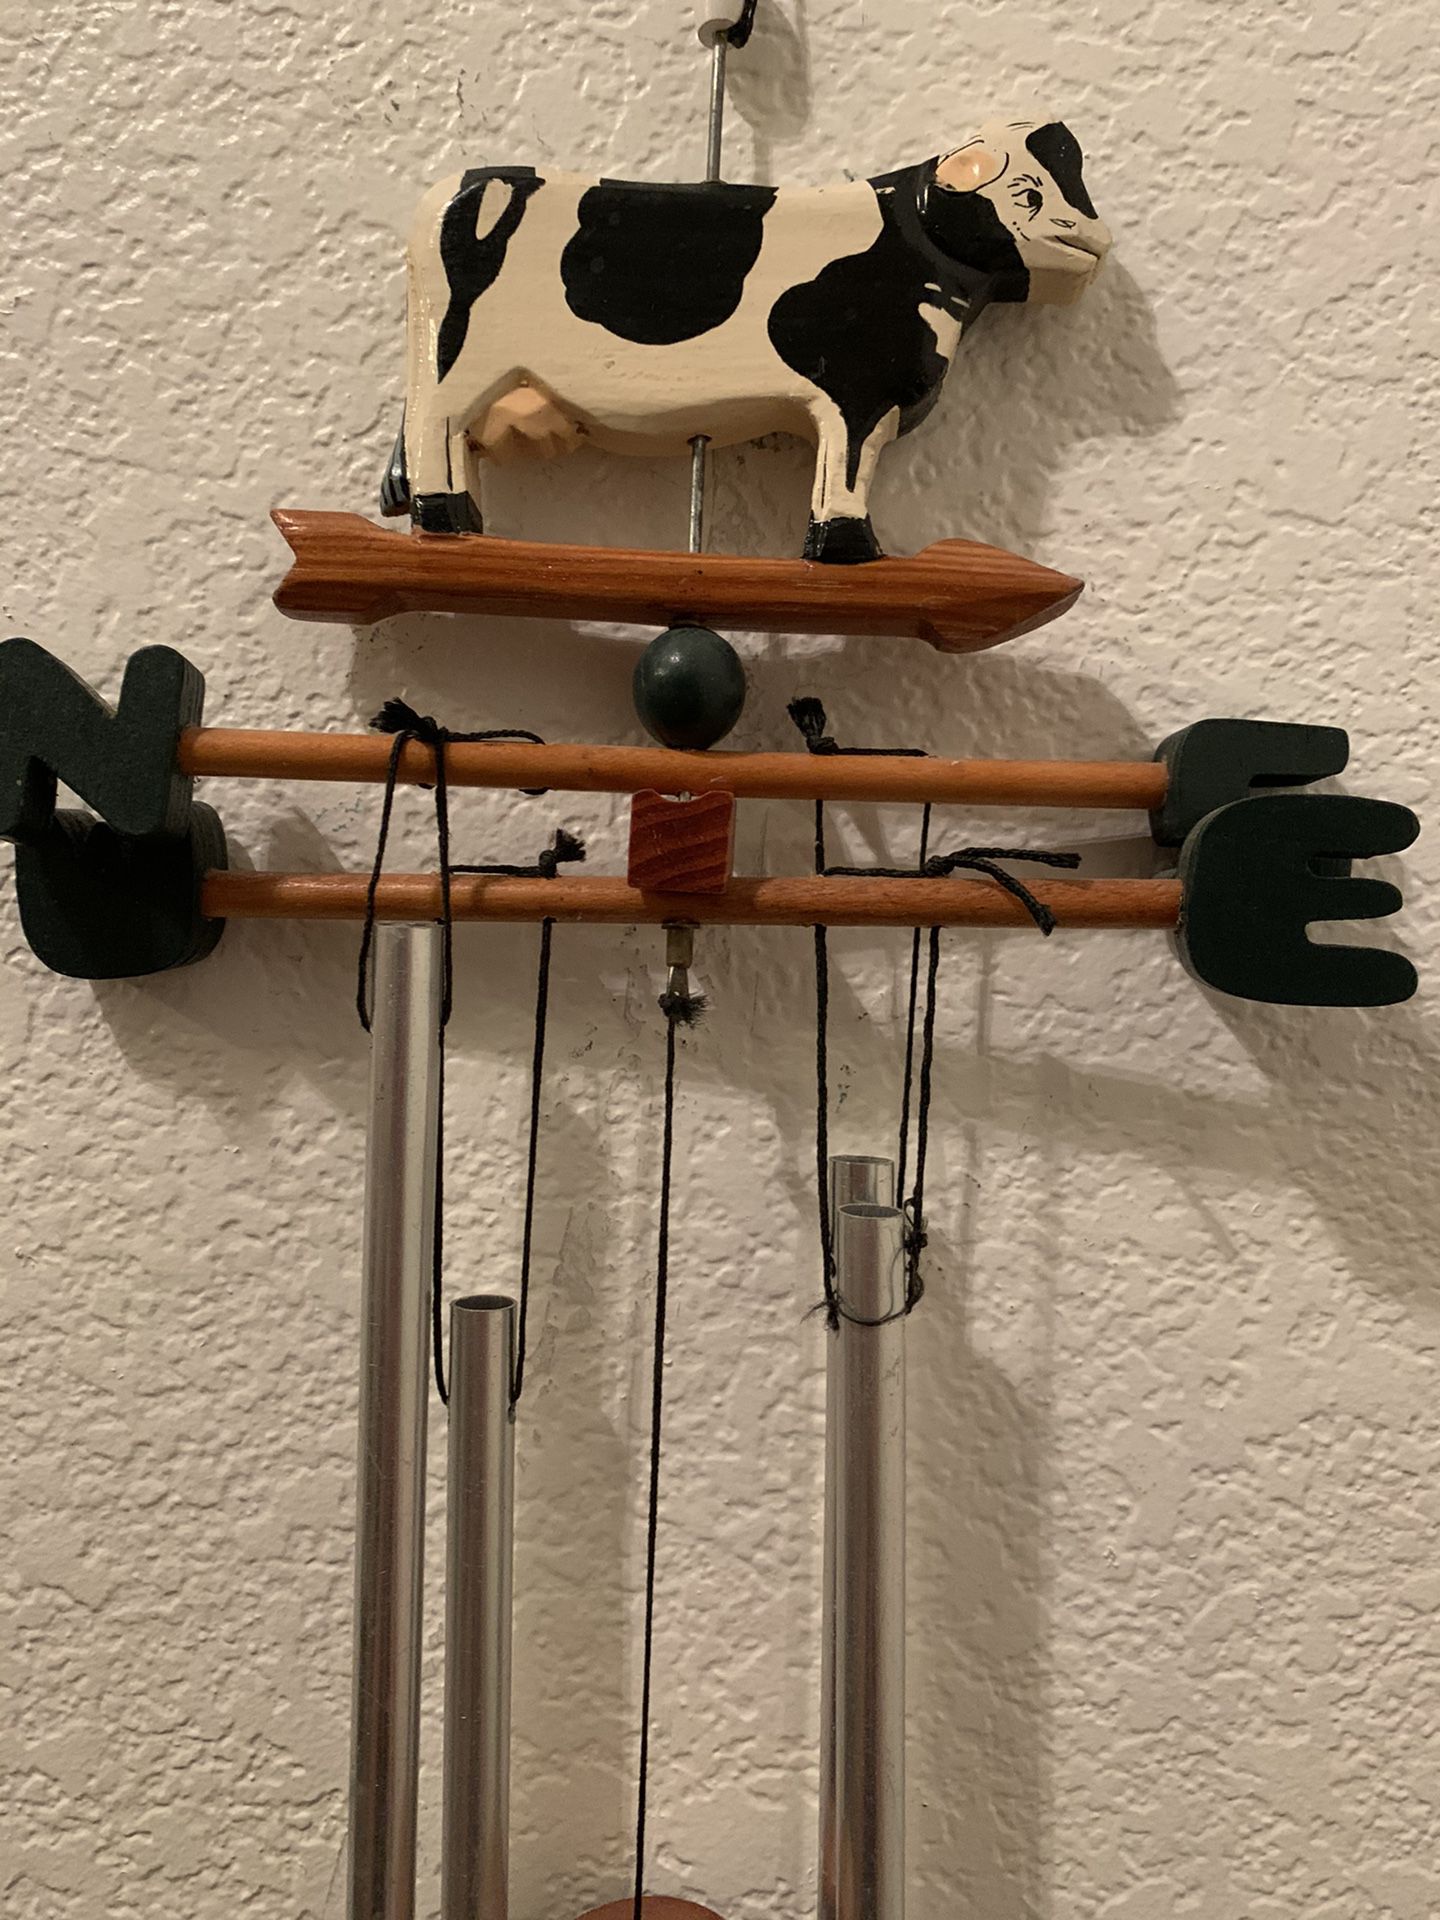 North East West South Cow Wind Chimes